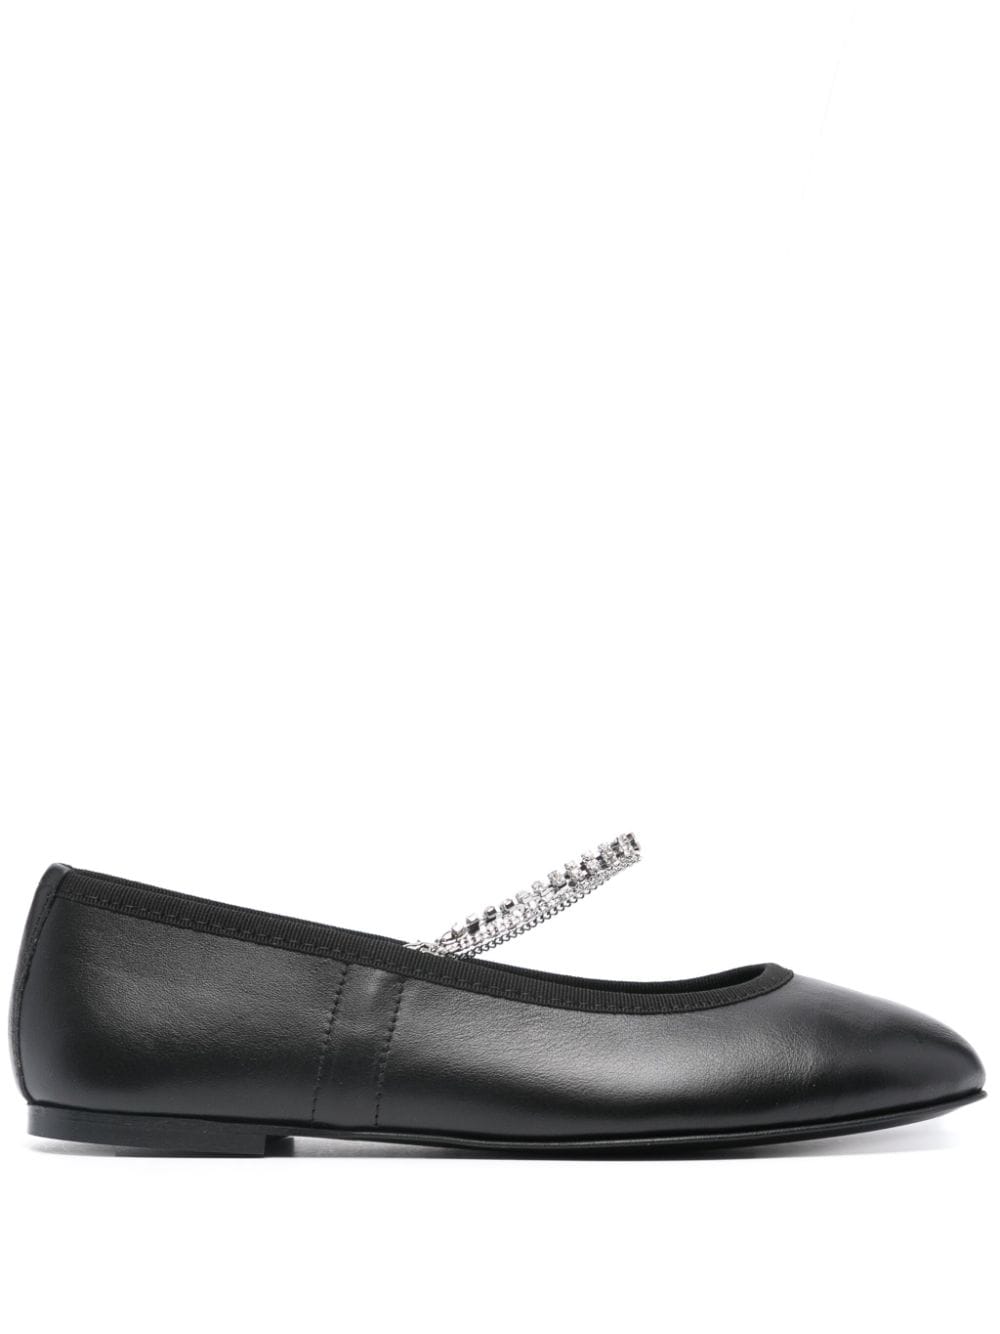 Kate Cate Juliette leather ballerina shoes - Black von Kate Cate